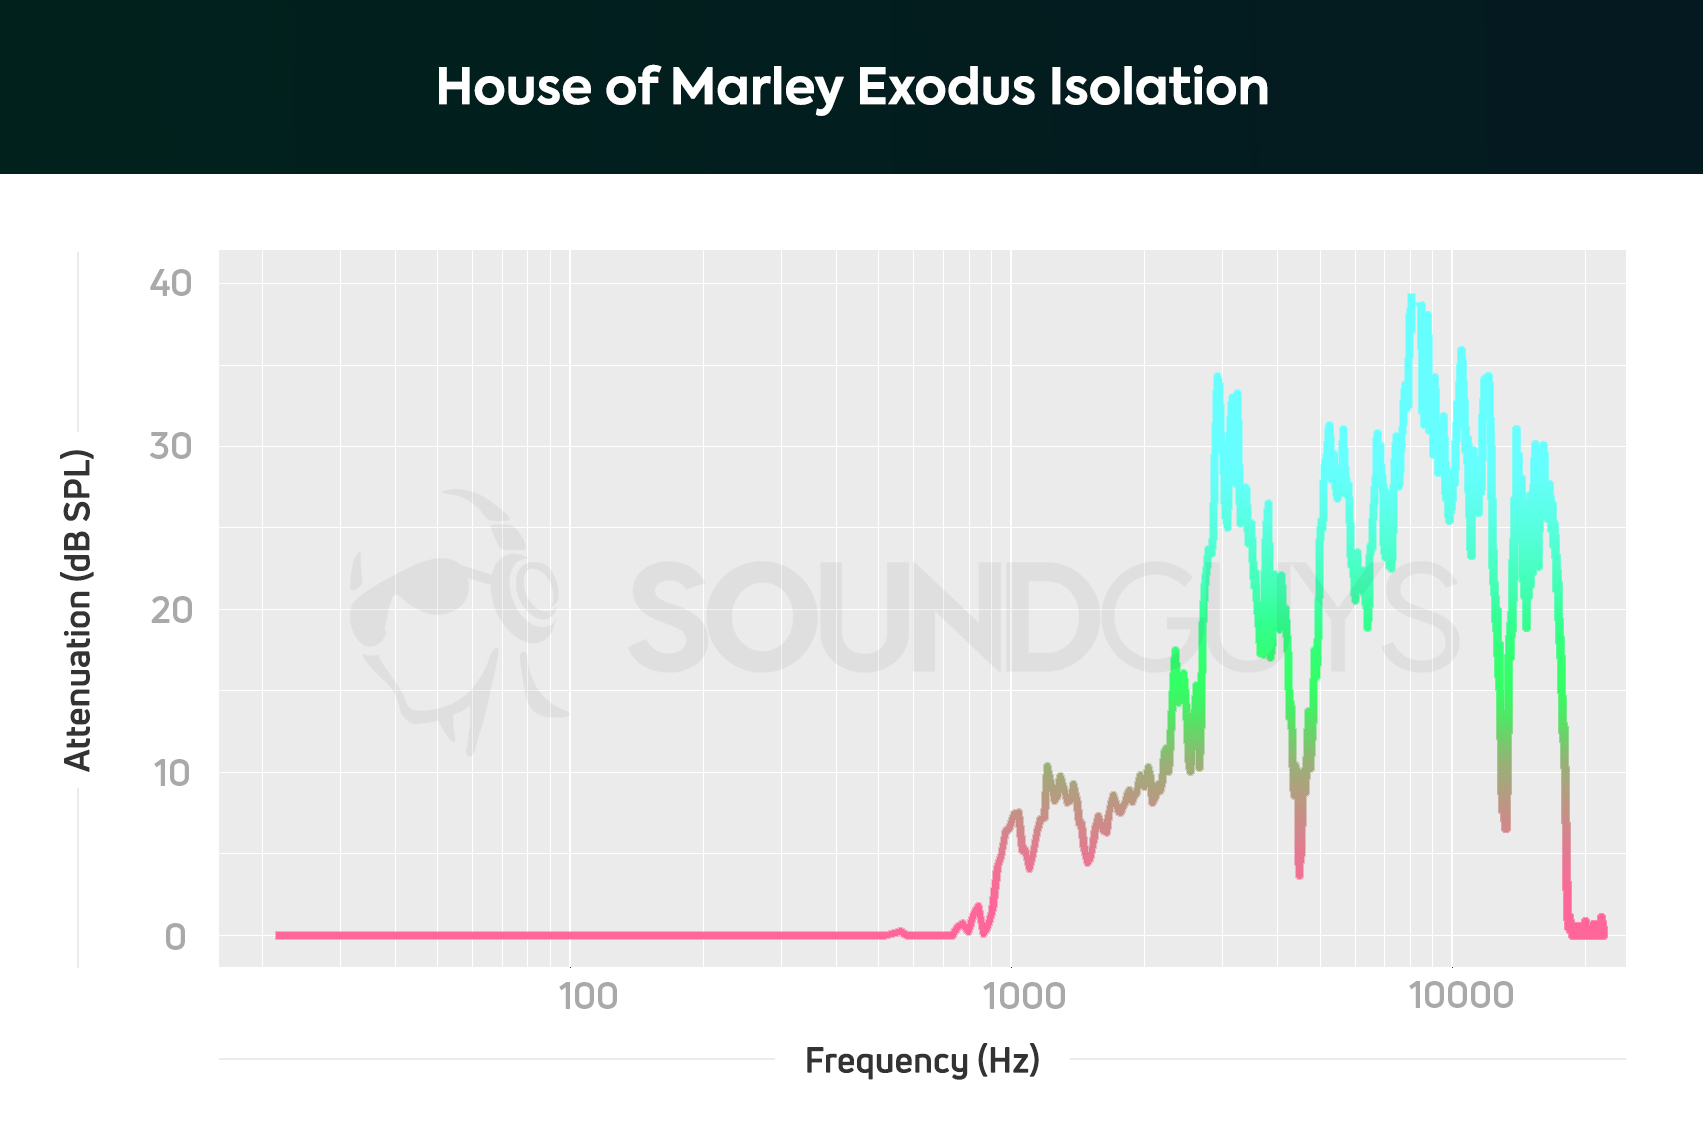 A chart depicts the House of Marley's isolation performance which is about average for over-ear headphones.